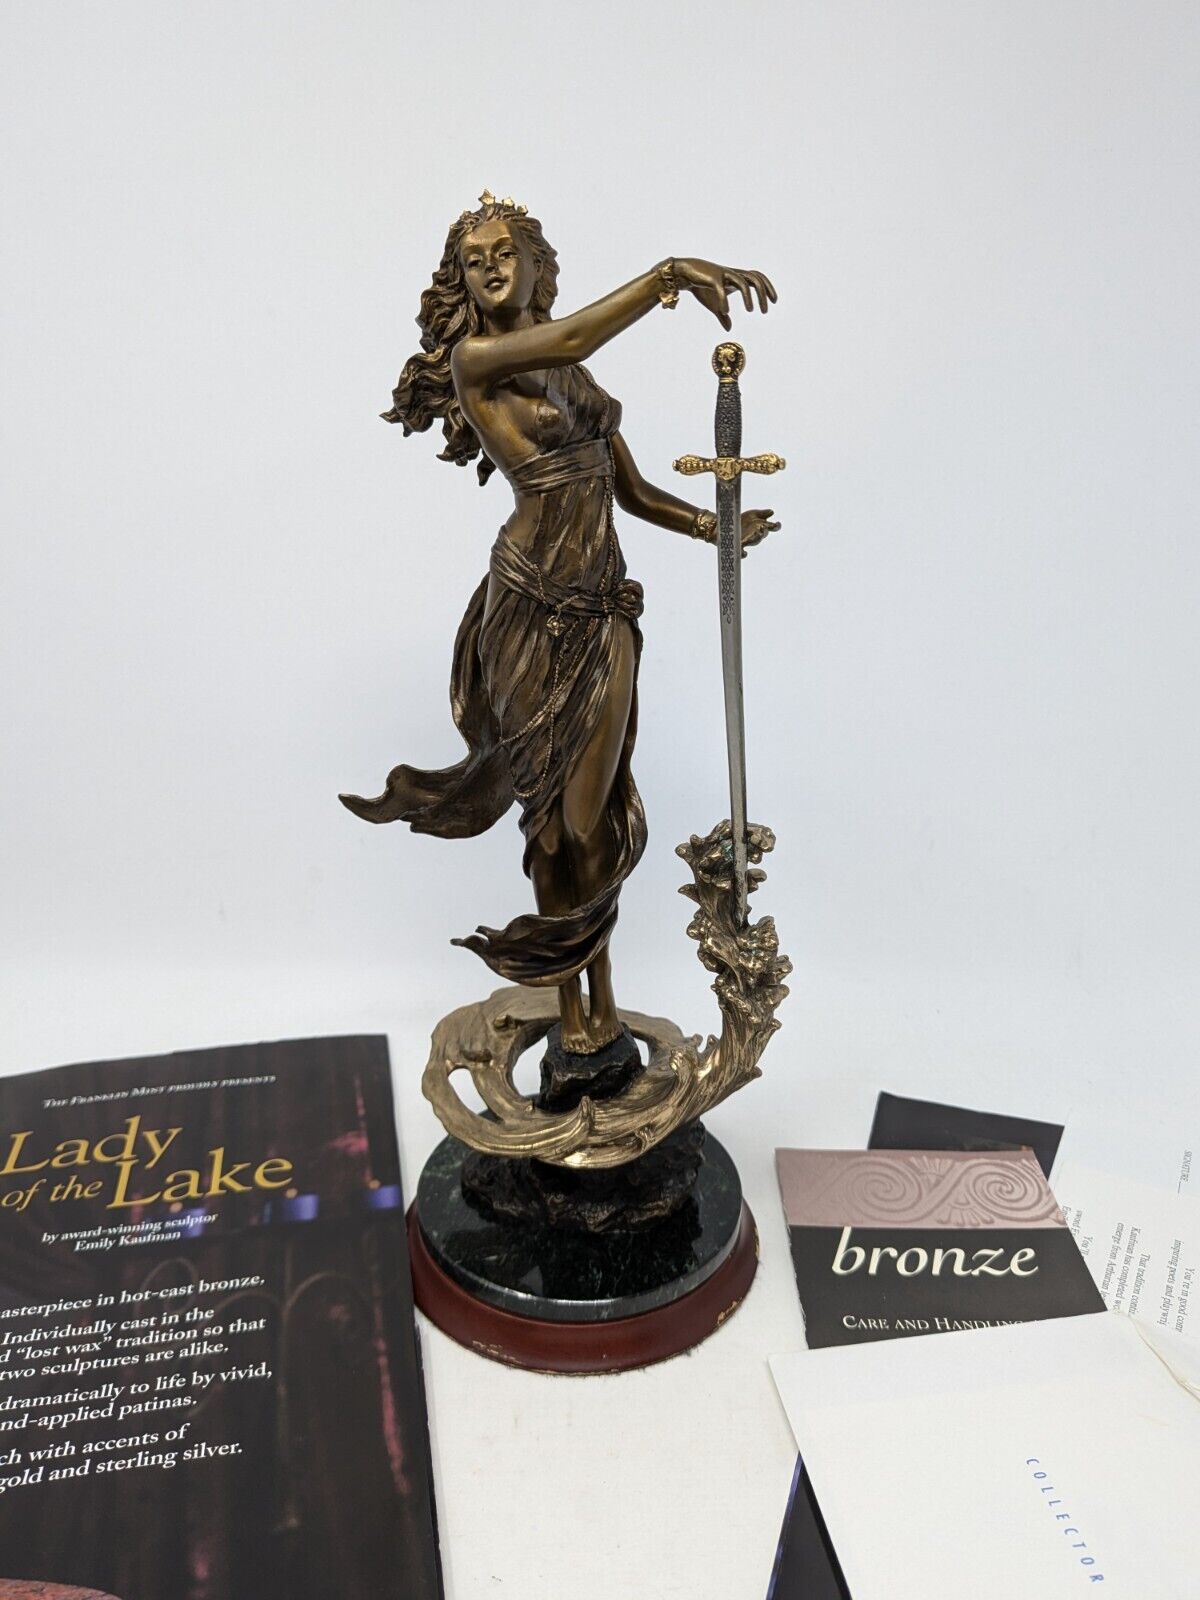 Franklin Mint LADY OF THE LAKE Bronze Sculpture Statue by Emily Kaufman